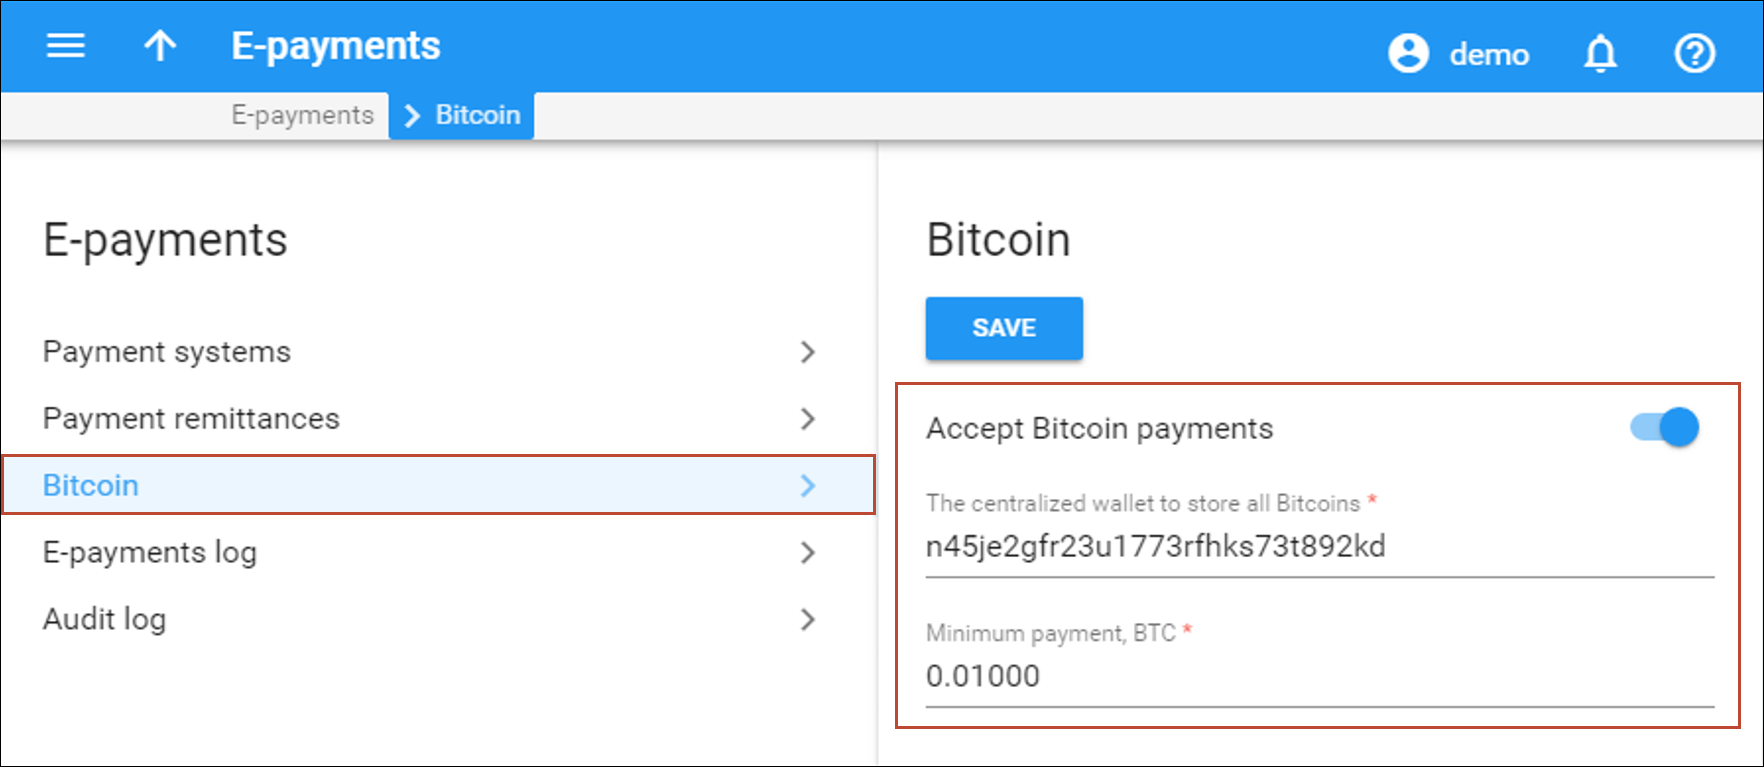 Enable Accept Bitcoin payments option